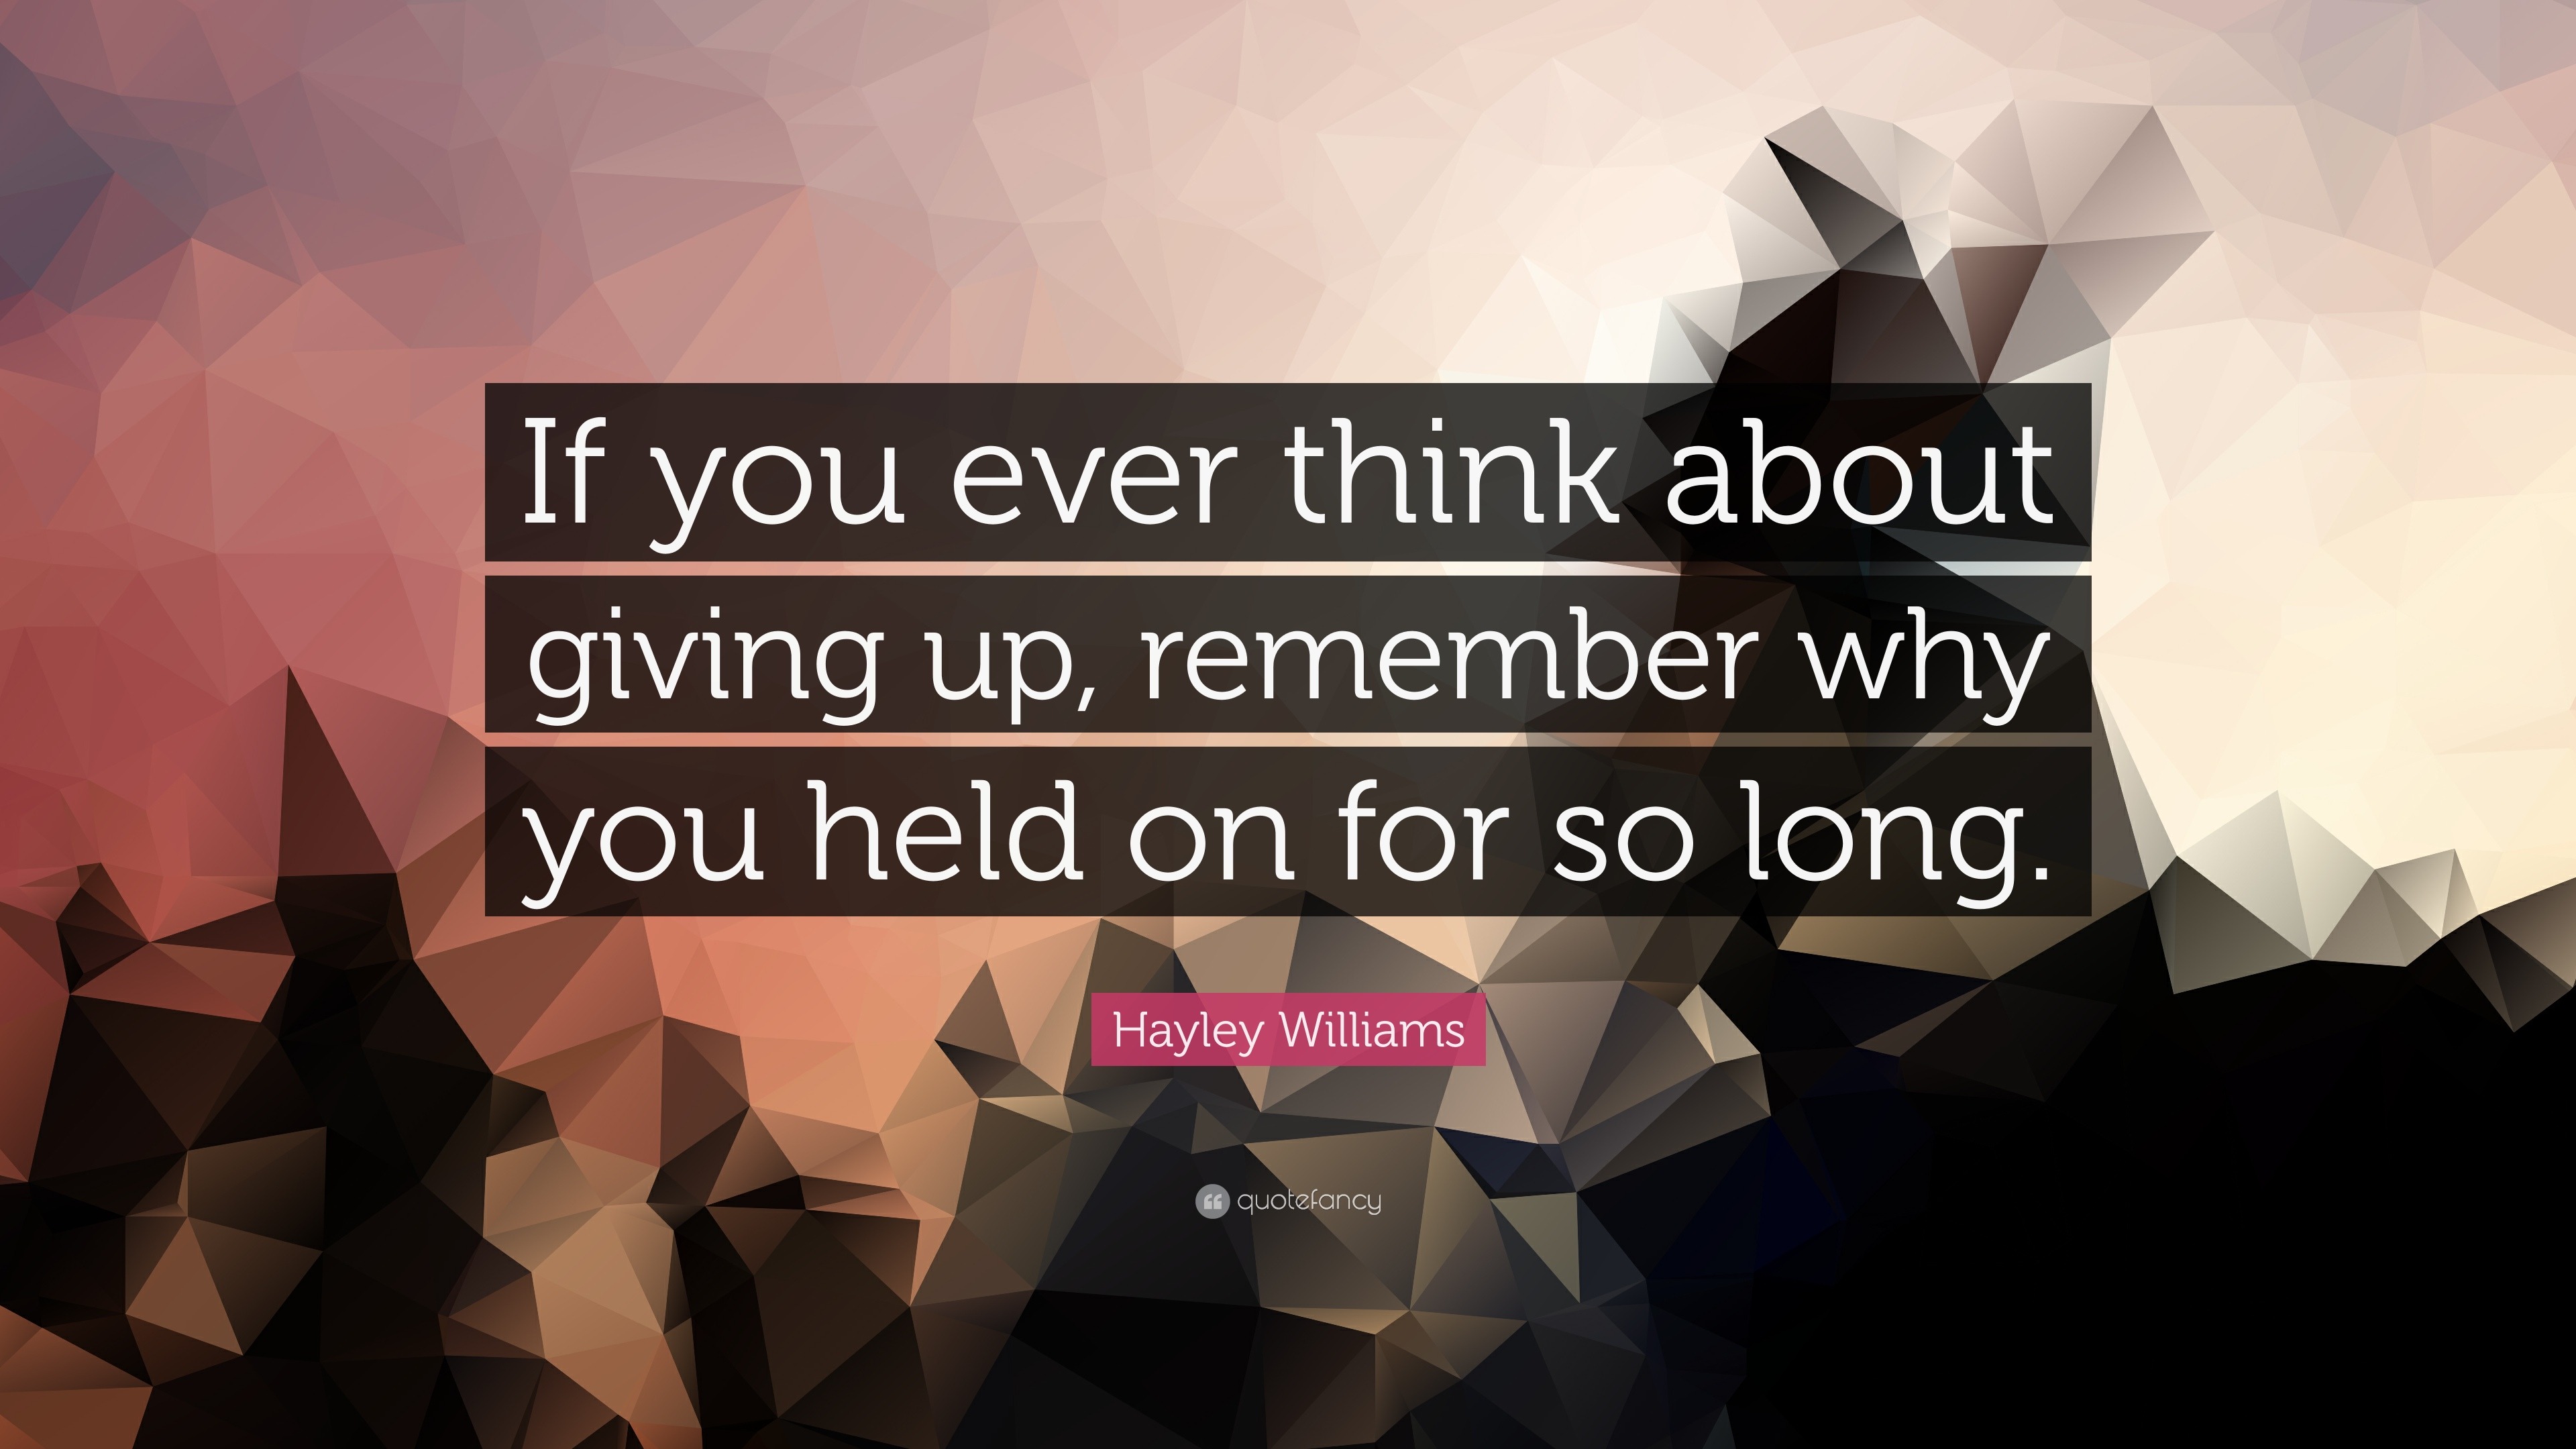 Hayley Williams Quote “If you ever think about giving up, remember why